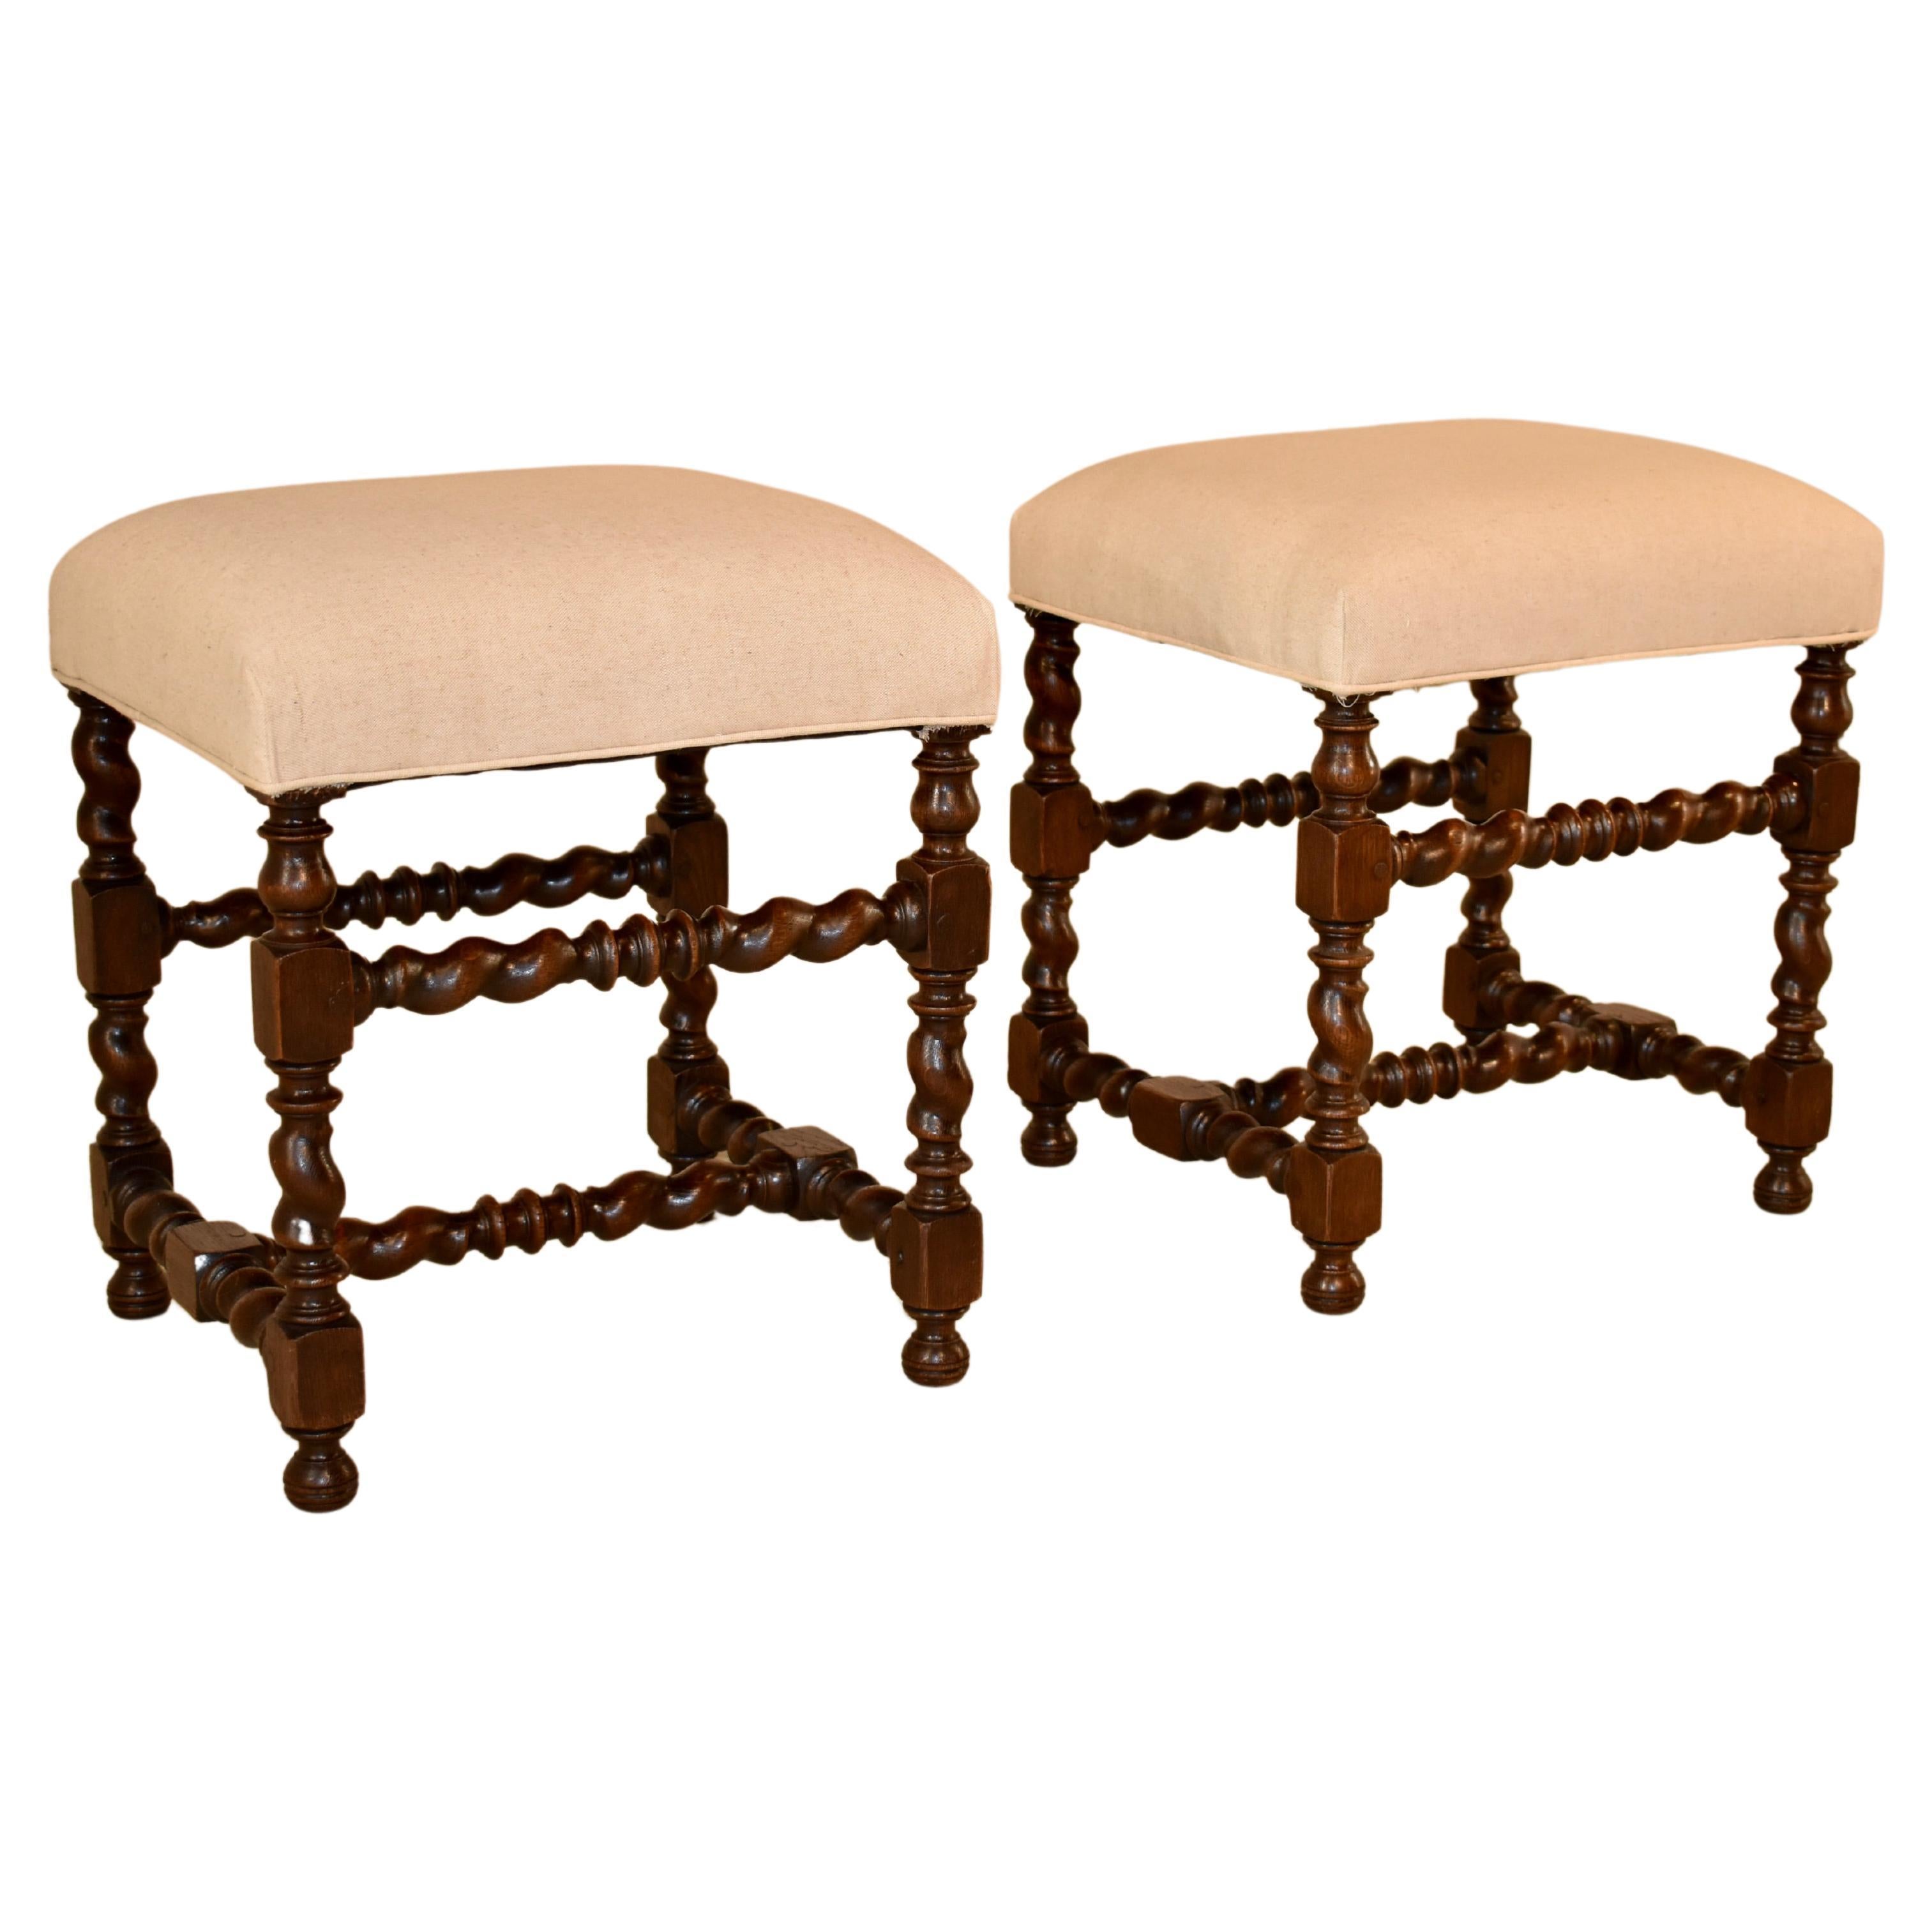 Pair of 19th century oak stools from France with newly upholstered tops in linen finished with a single welt. The frames have hand-turned barley twist legs, joined by matching stretchers and raised on small bun feet.